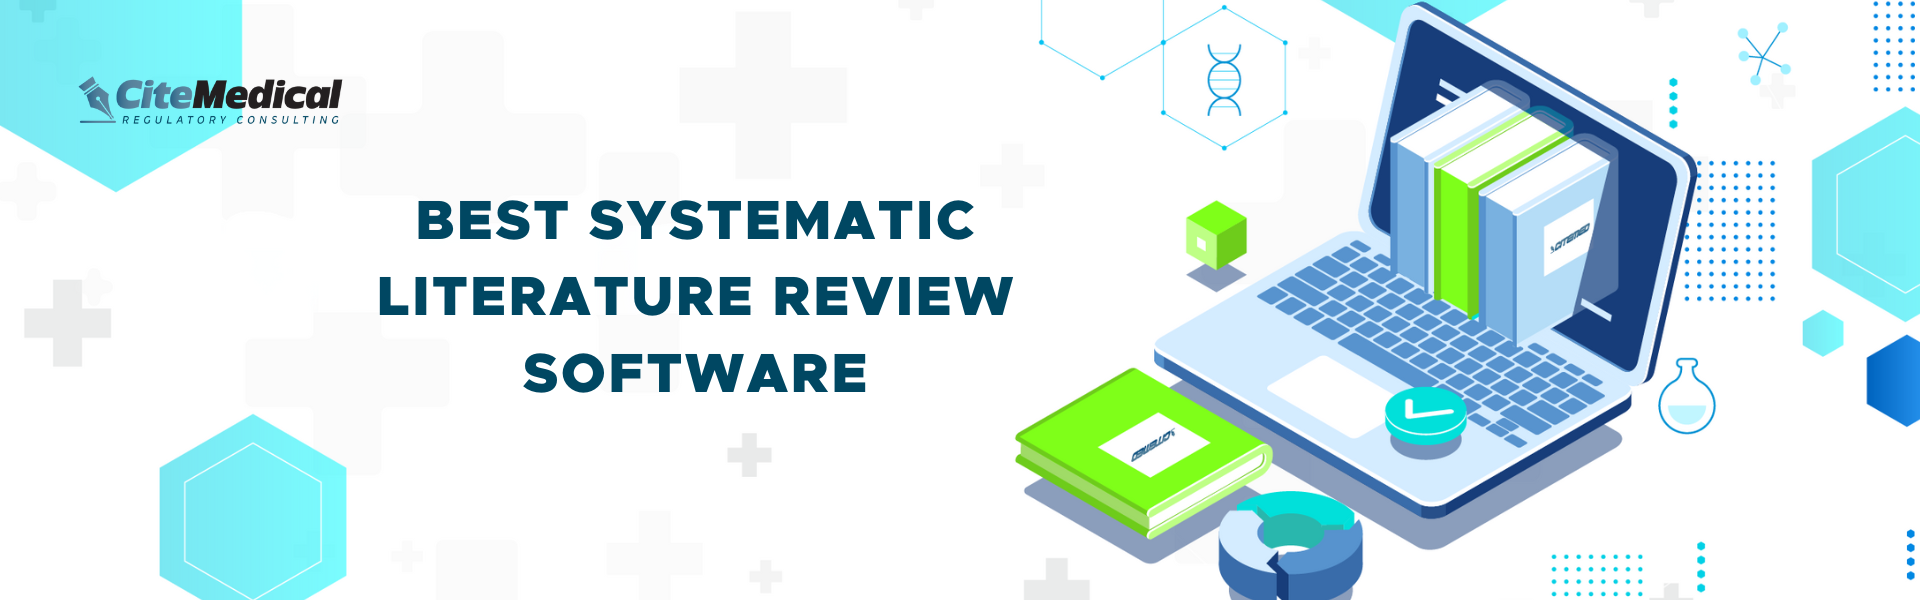 Best Systematic Literature Review Software